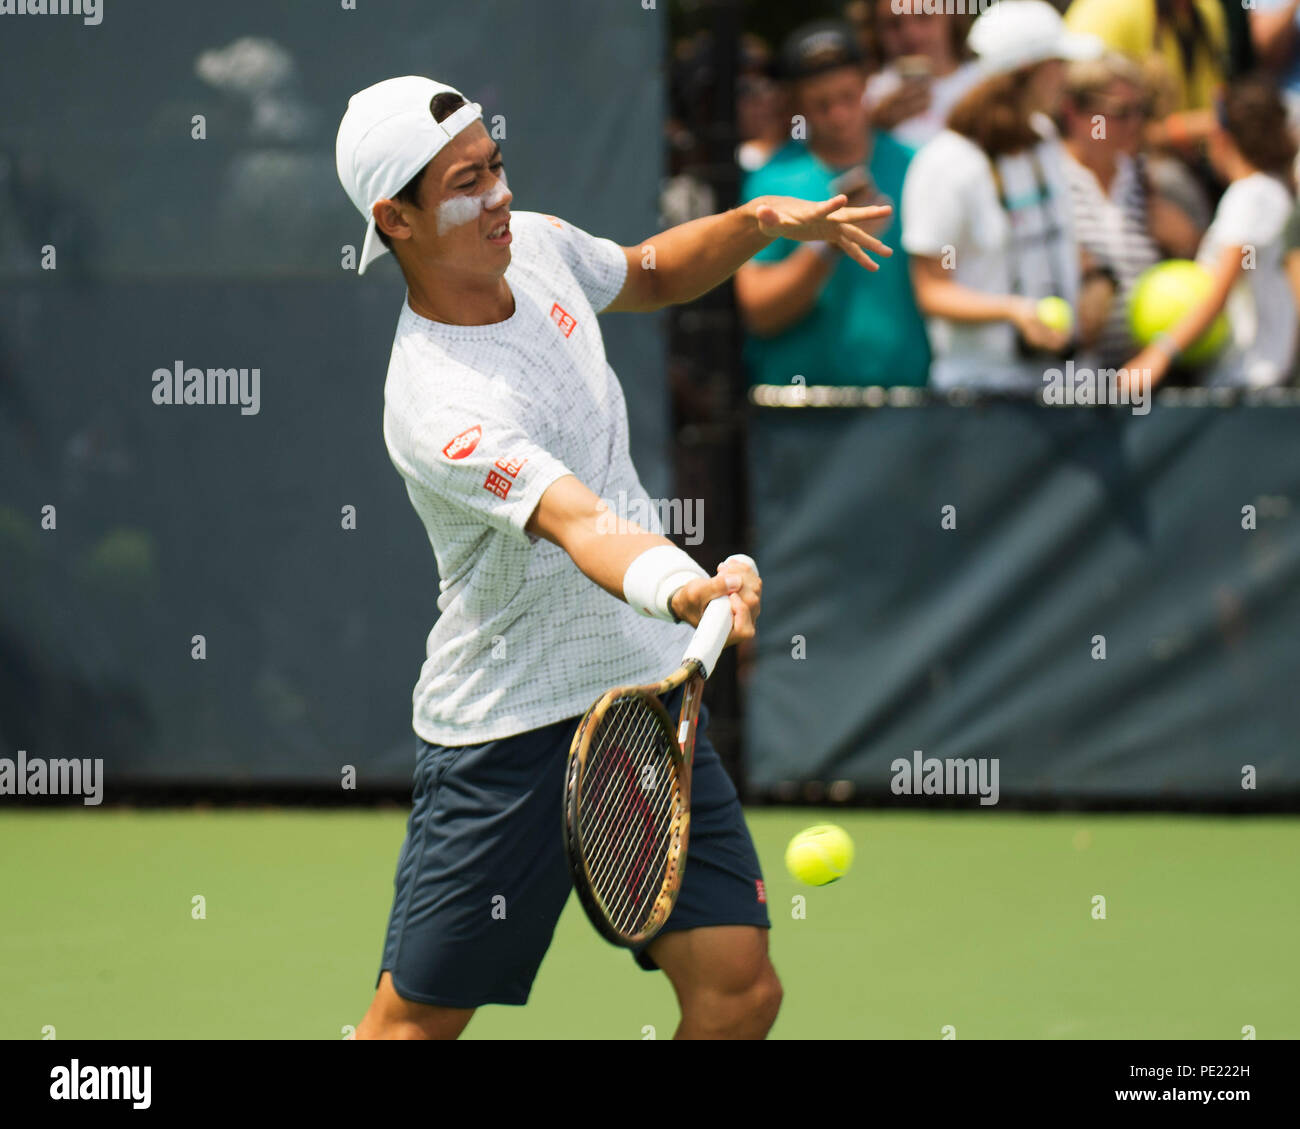 Ohio, USA, August 11, 2018: Kei Nishkori practices against Andy Murray at the Western Southern Open in Mason, Ohio, USA. Brent Clark/Alamy Live News Stock Photo